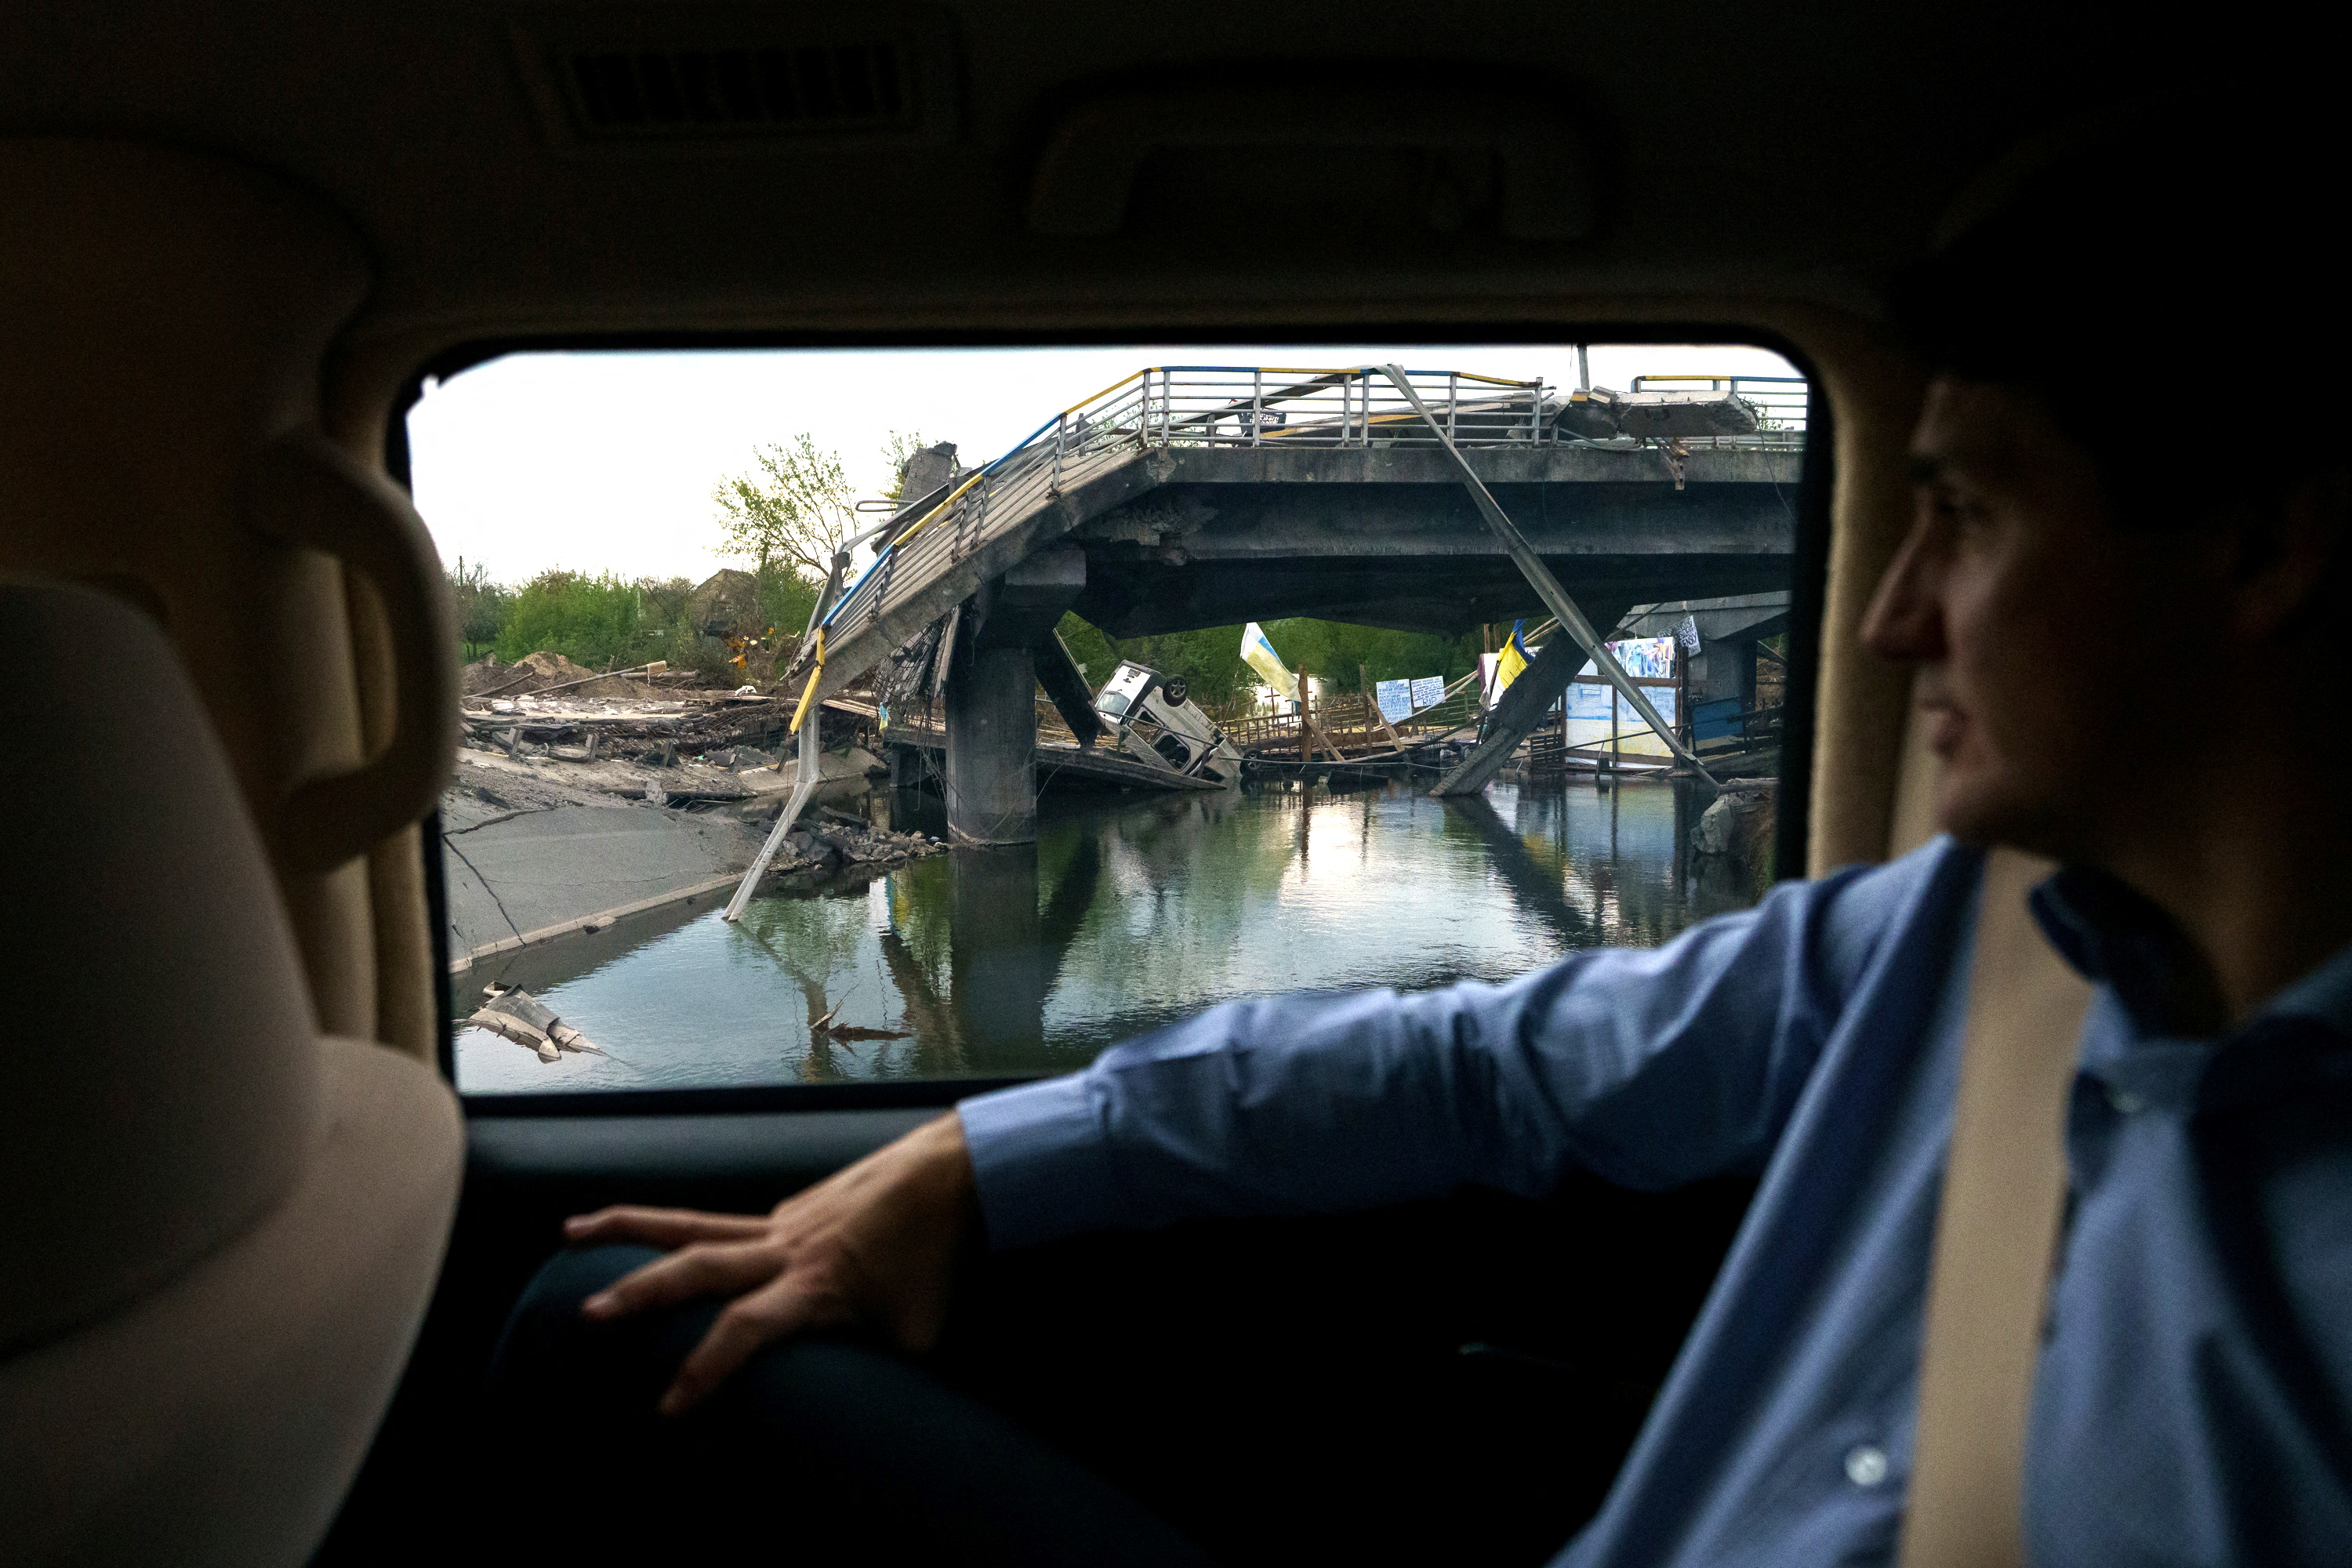 Canada's Prime Minister Justin Trudeau visits a destroyed neighborhood in Irpin